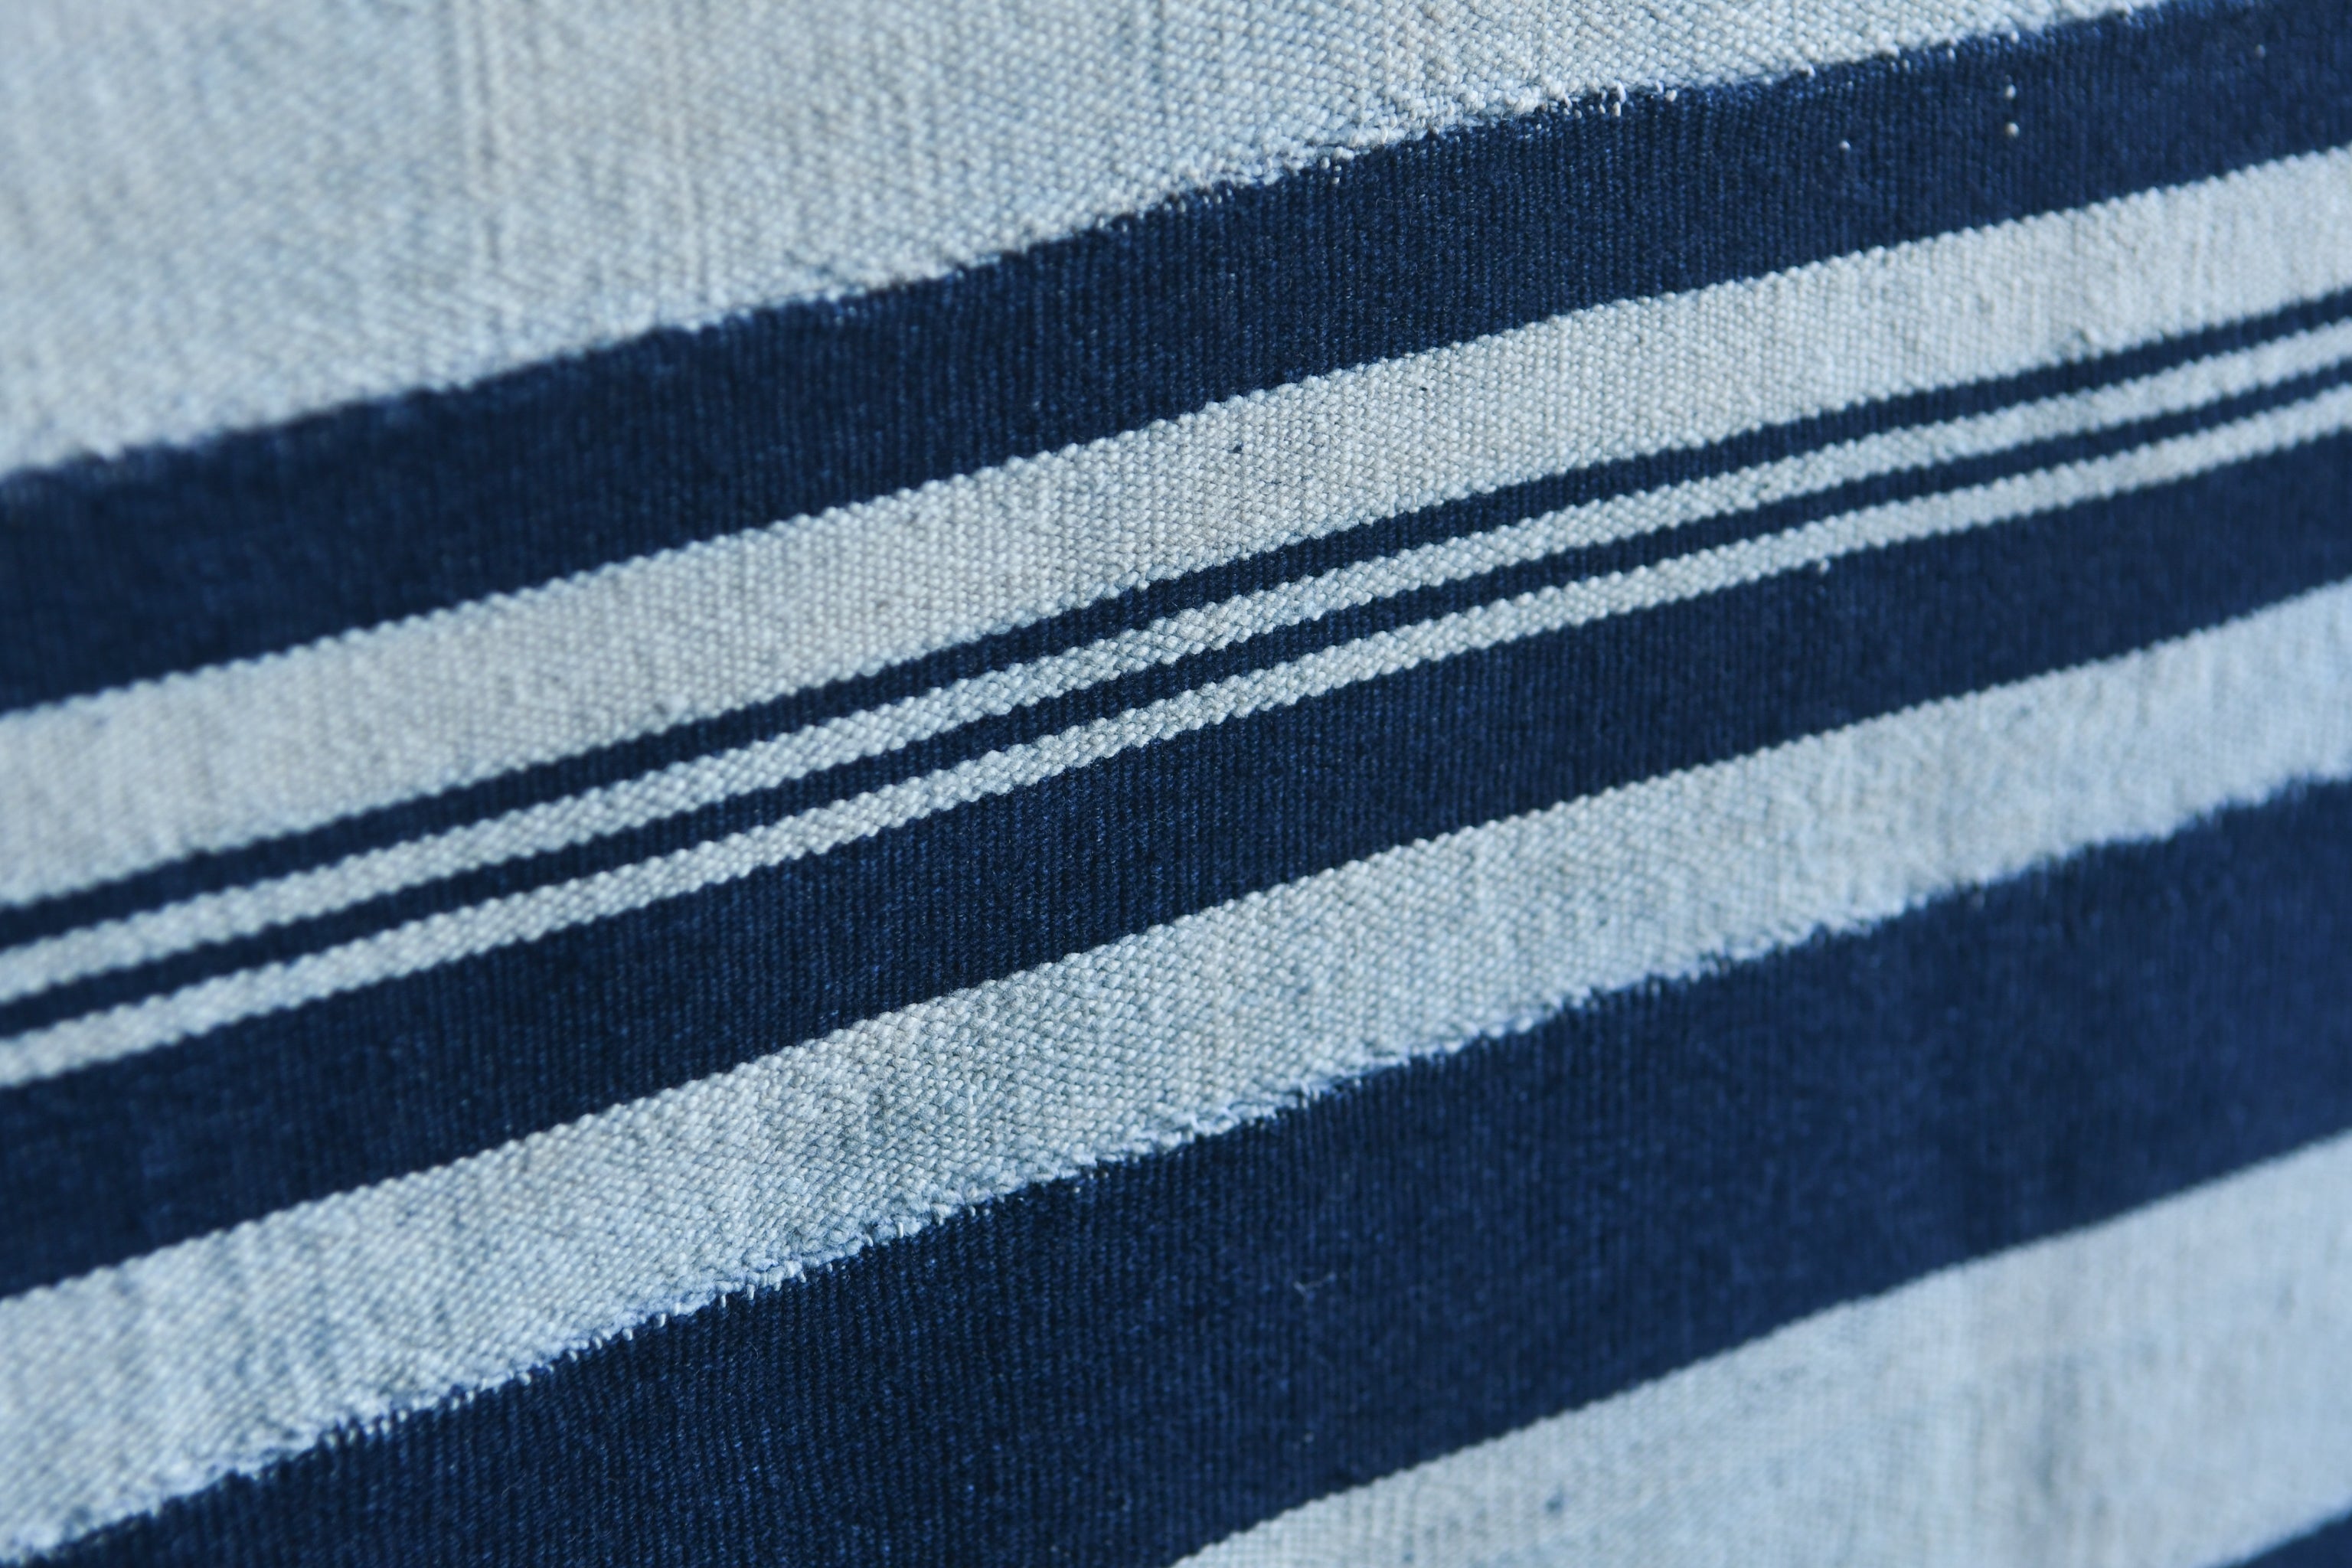 Handcrafted Textiles - Artisan Designed - Handcrafted African Art Textiles - Home Decor - Living Spaces - Mix Colors - Bold Patterns - Traditional Designs - African Culture - This African Indigo textile features a unique tie-dyed design with classic blue and white stripes for a vintage look. Crafted from 100% cotton, the fabric has a breathable, lightweight feel and is perfect for creating stylish garments and home décor with a timeless style. Length: 63 inches Width : 44 inches